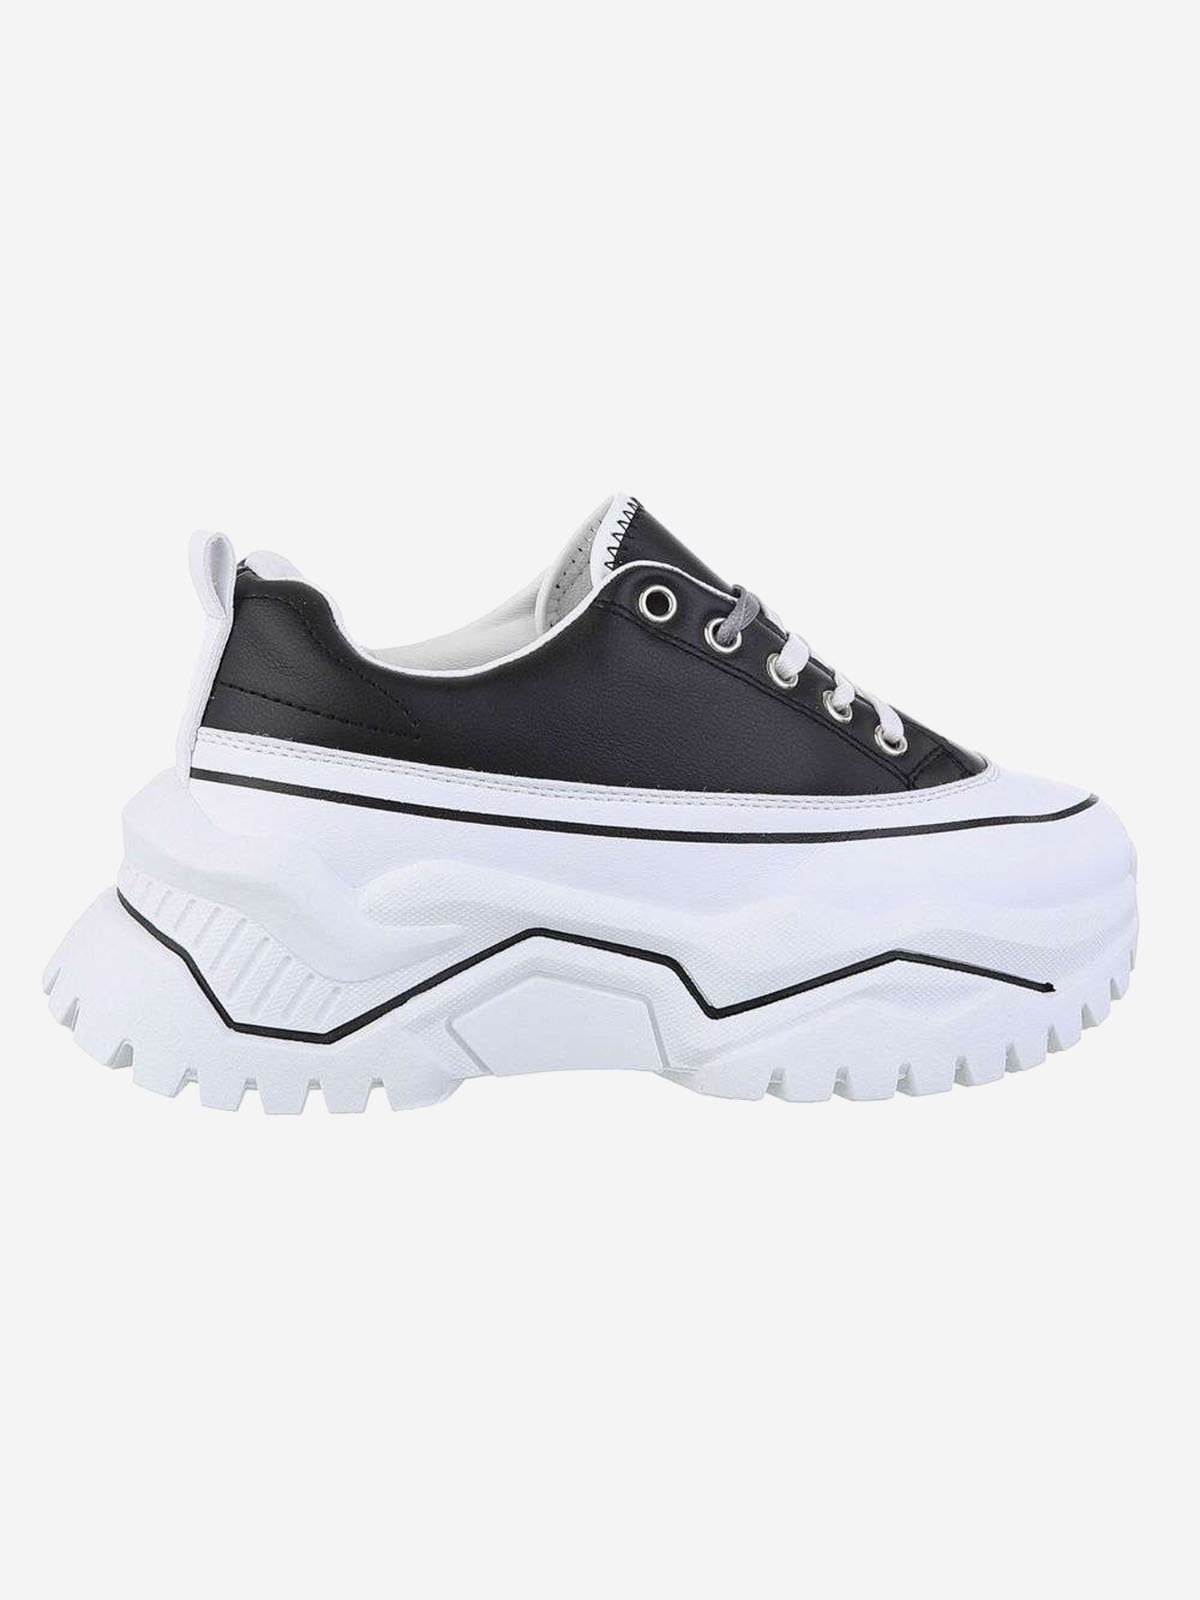 Lace up chunky sole women's trainers in black